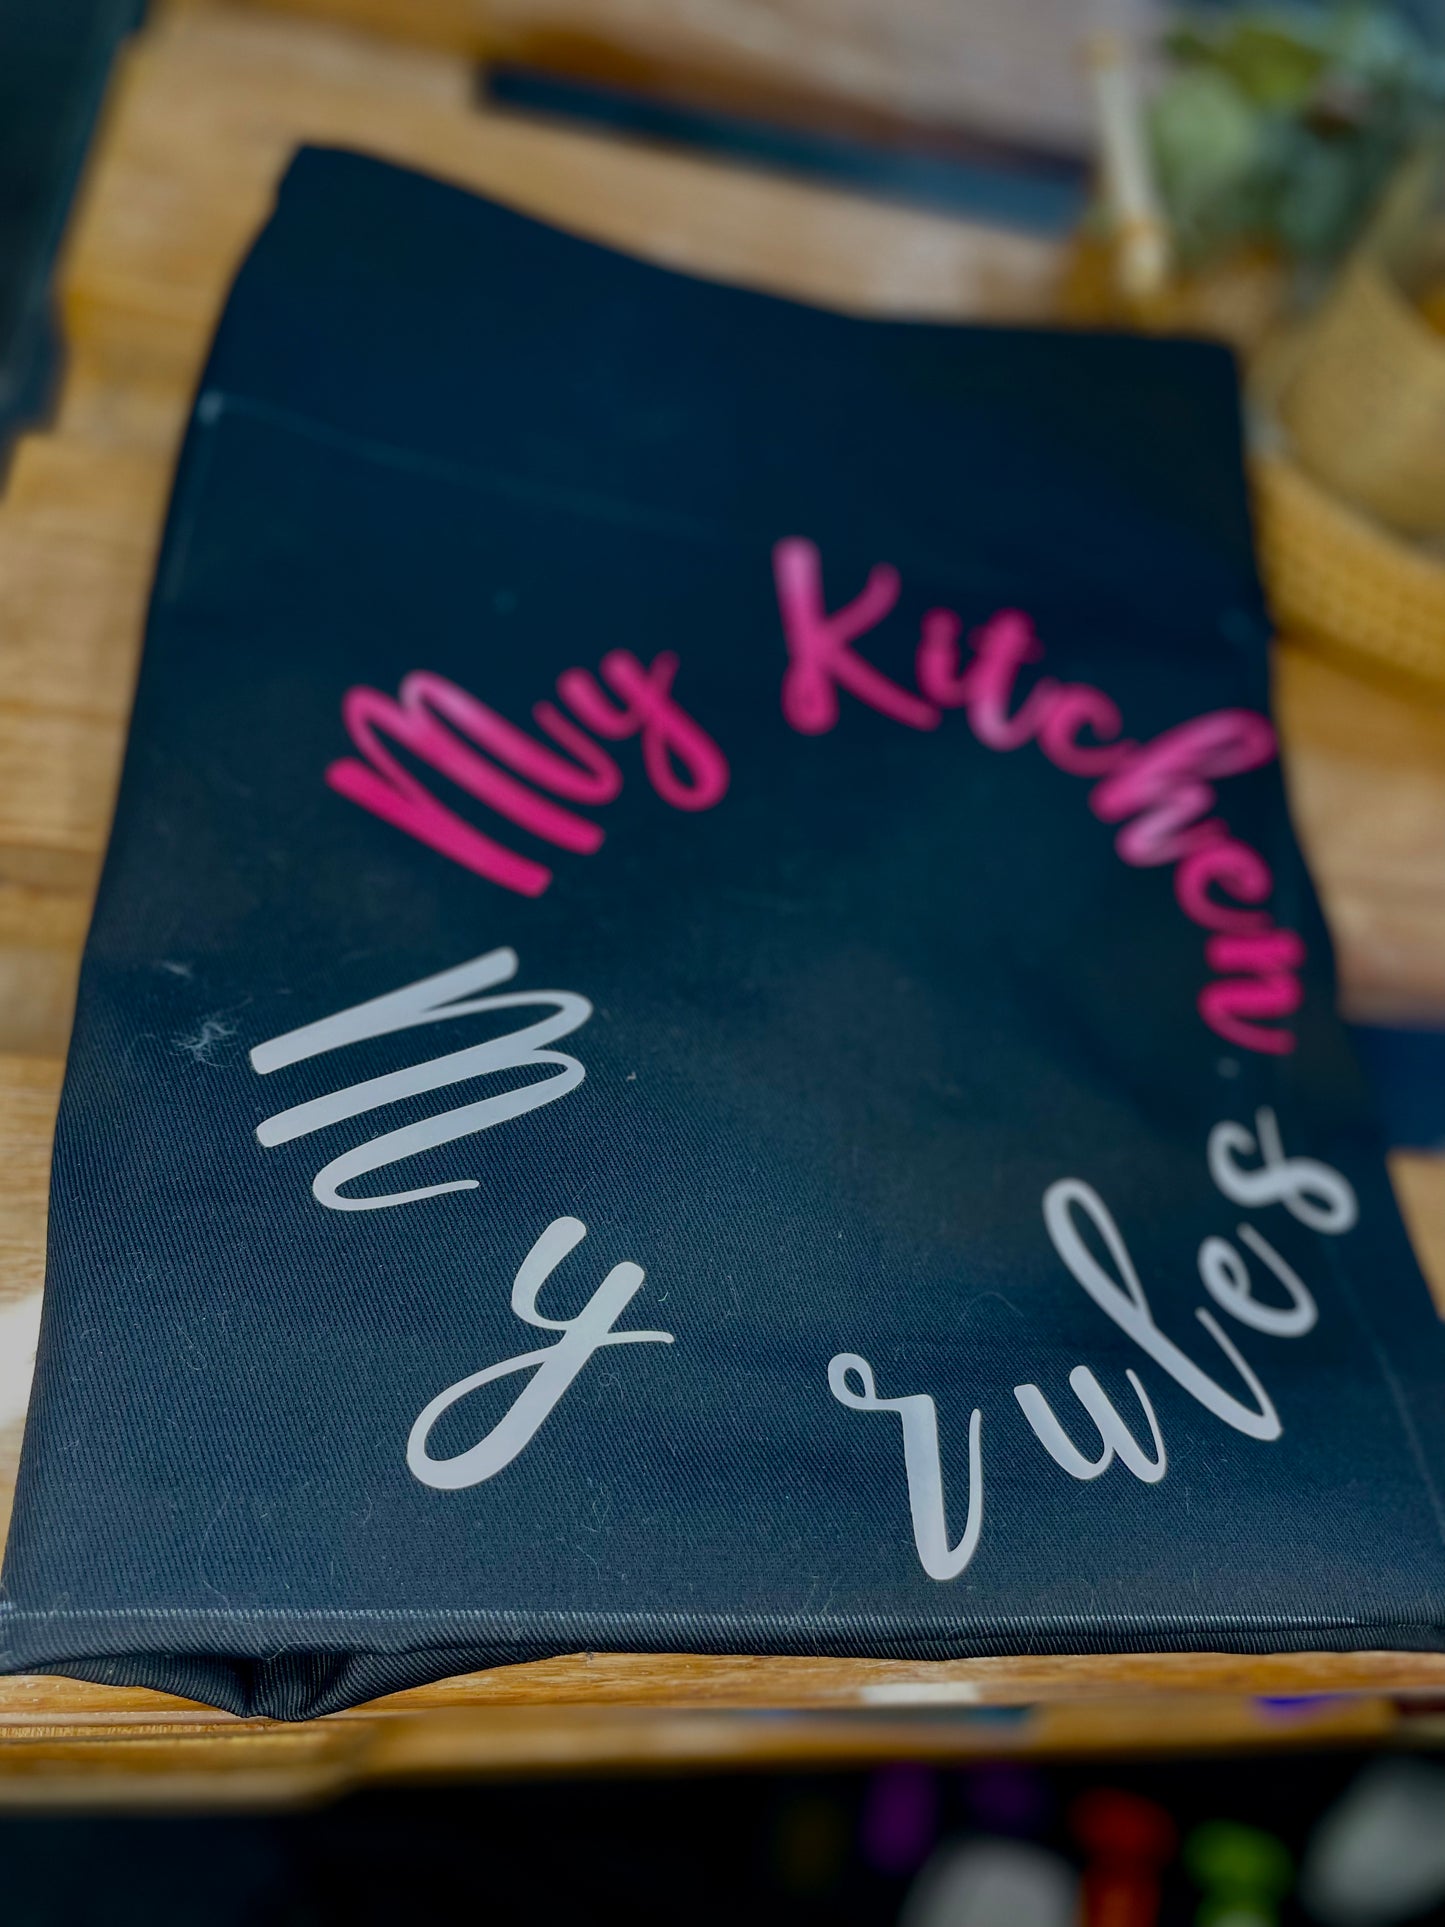 Personalized aprons